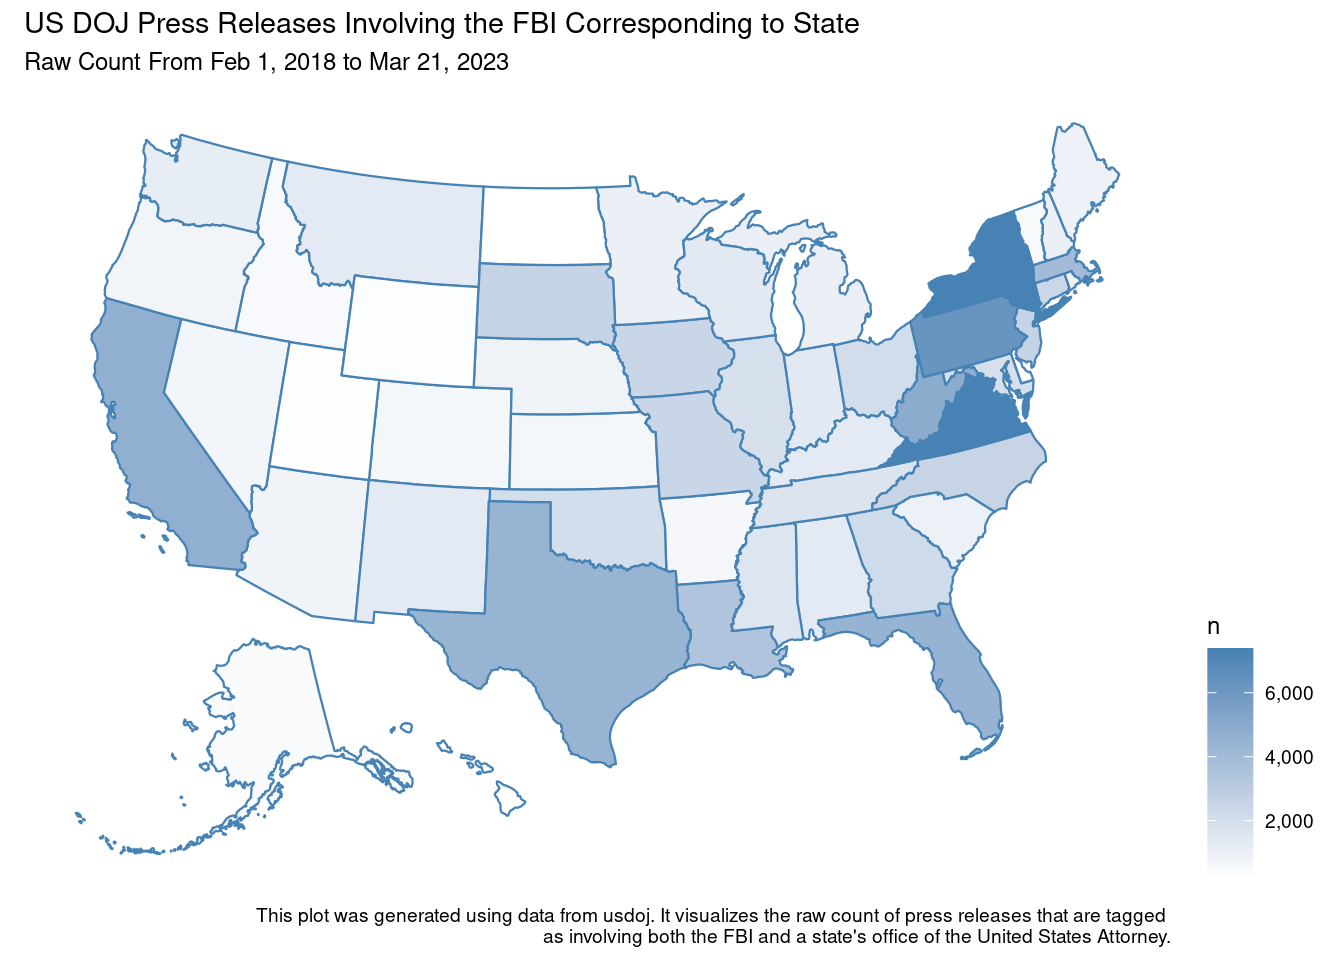 A choropleth map of the United States, visualizing the number of press releases containing mentions to the FBI in each state